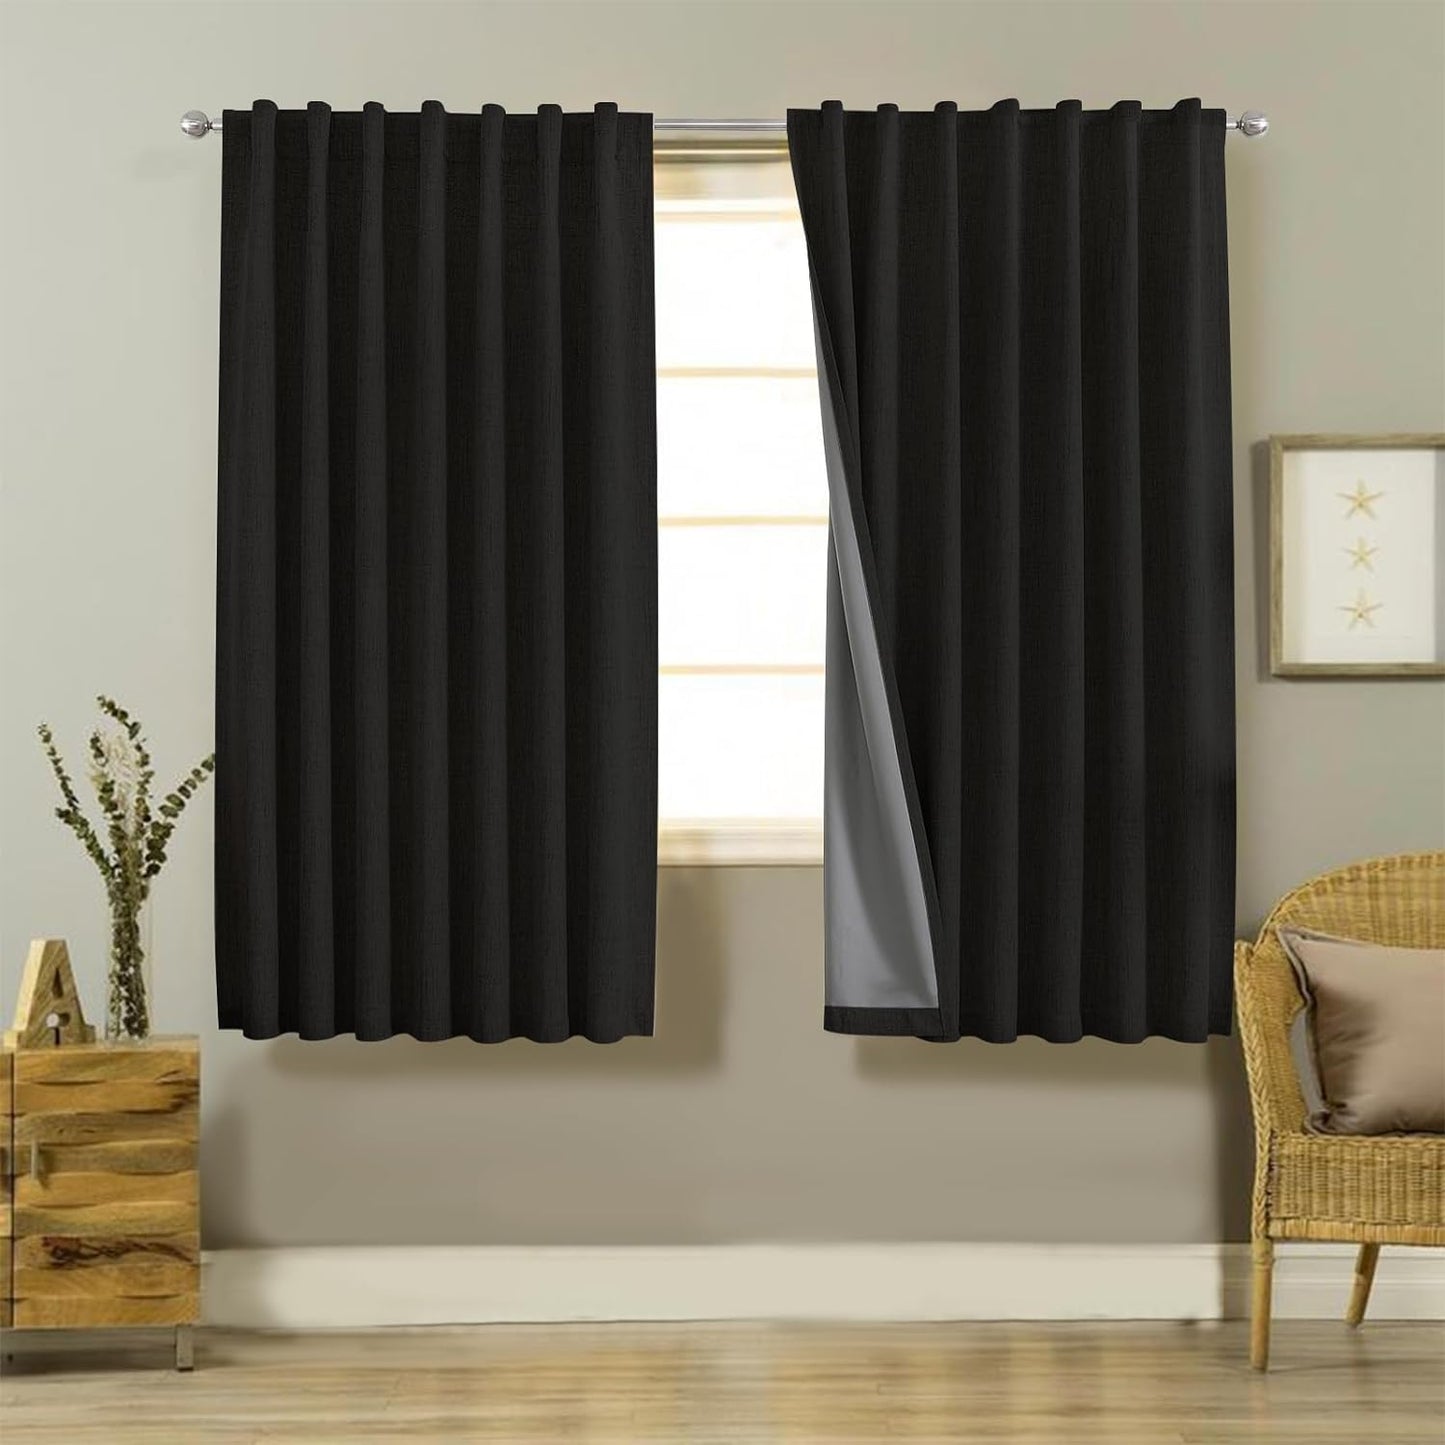 Joydeco 100% Black Out Curtains 96 Inch Long 1 Panels Burg Natural Blackout Linen Drapes for Bedroom Living Room Darkening Curtain Thermal Insulated Back Tab Rod Pocket(70X96 Inch,Black)  Joydeco Black 37W X 63L Inch X 2 Panels 